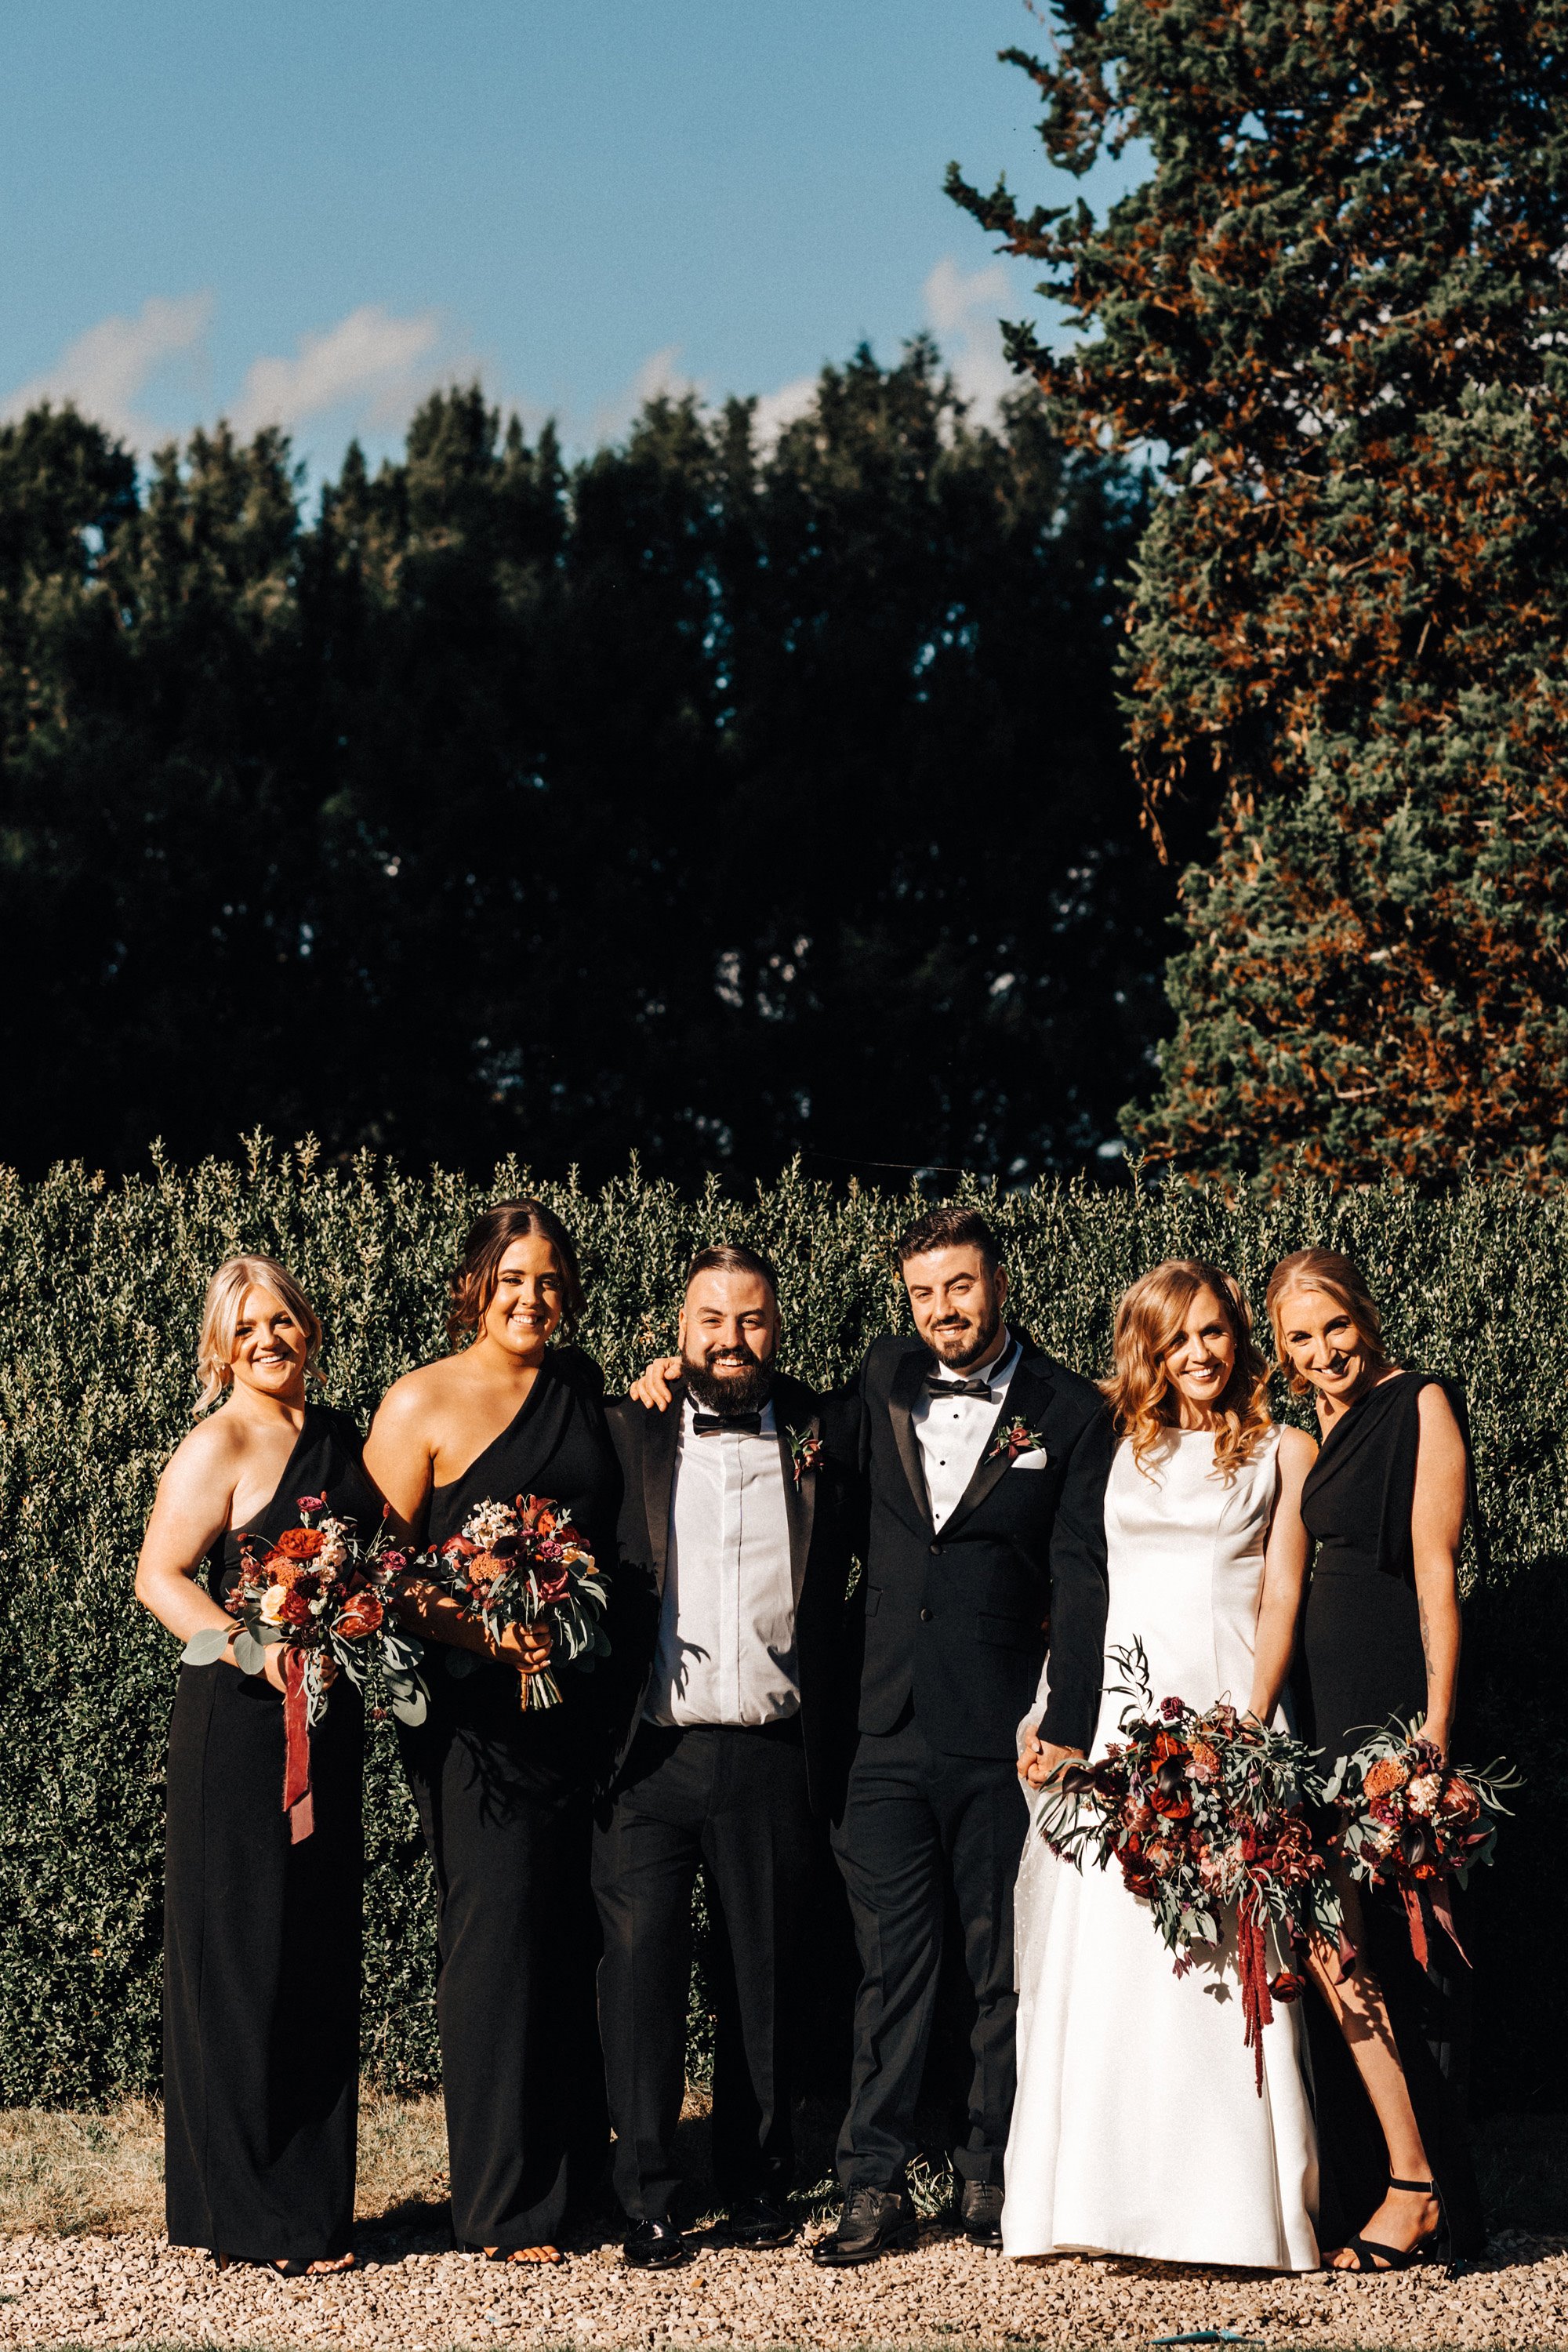 bridesmaids in black dresses and groomsmen in black tuxedos for a relaxed black tie autumn wedding with black accents in the cotswolds